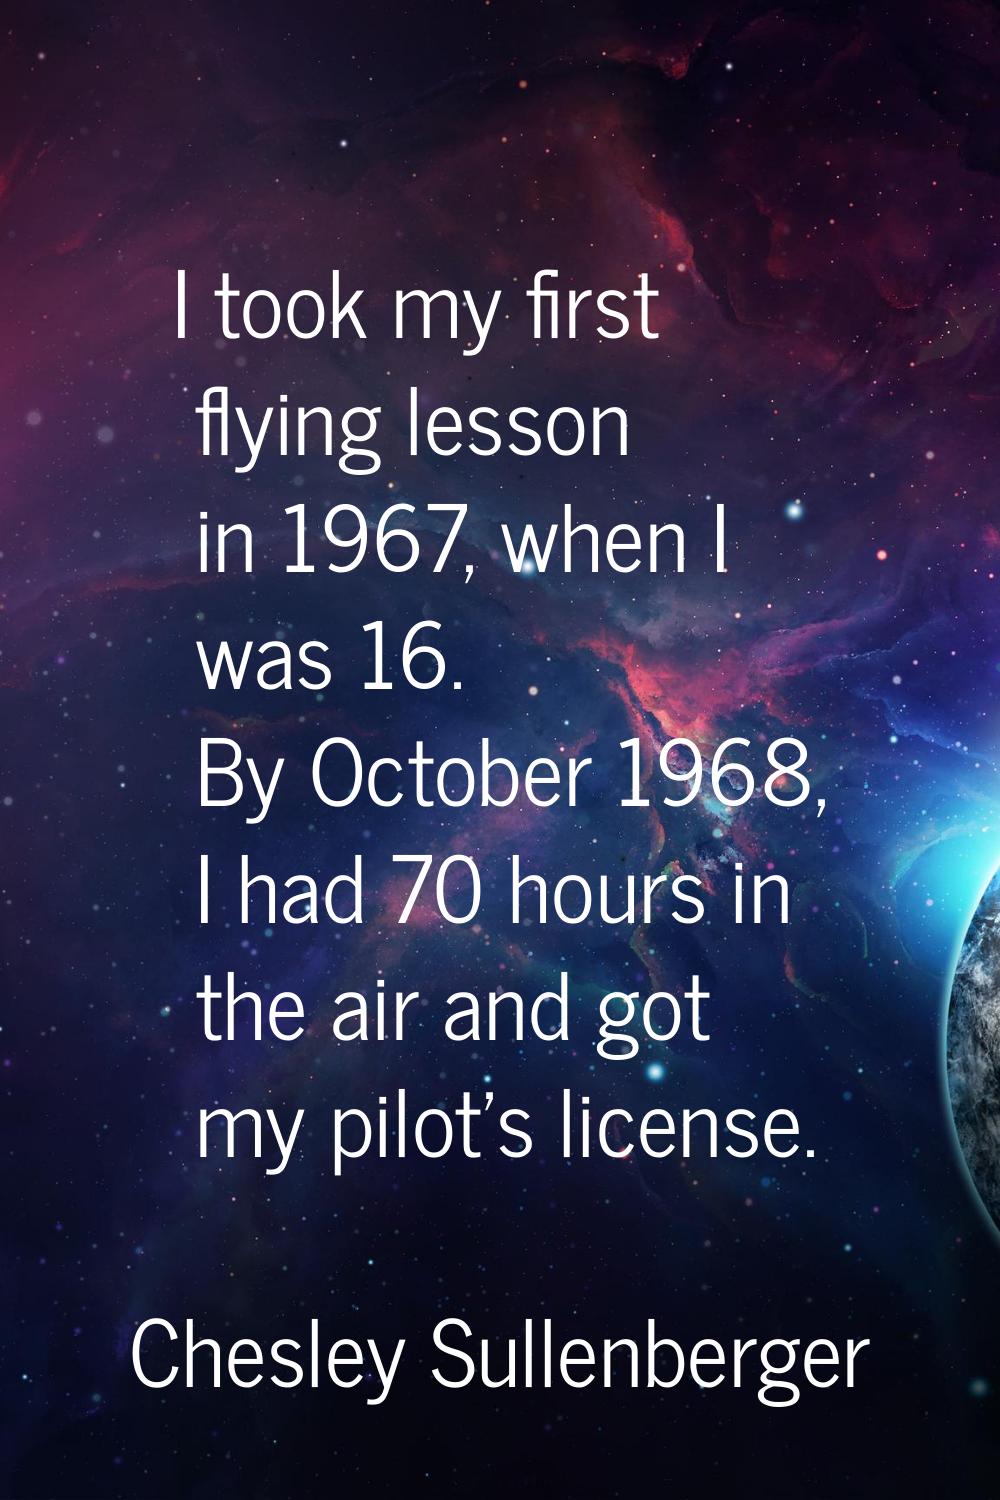 I took my first flying lesson in 1967, when I was 16. By October 1968, I had 70 hours in the air an